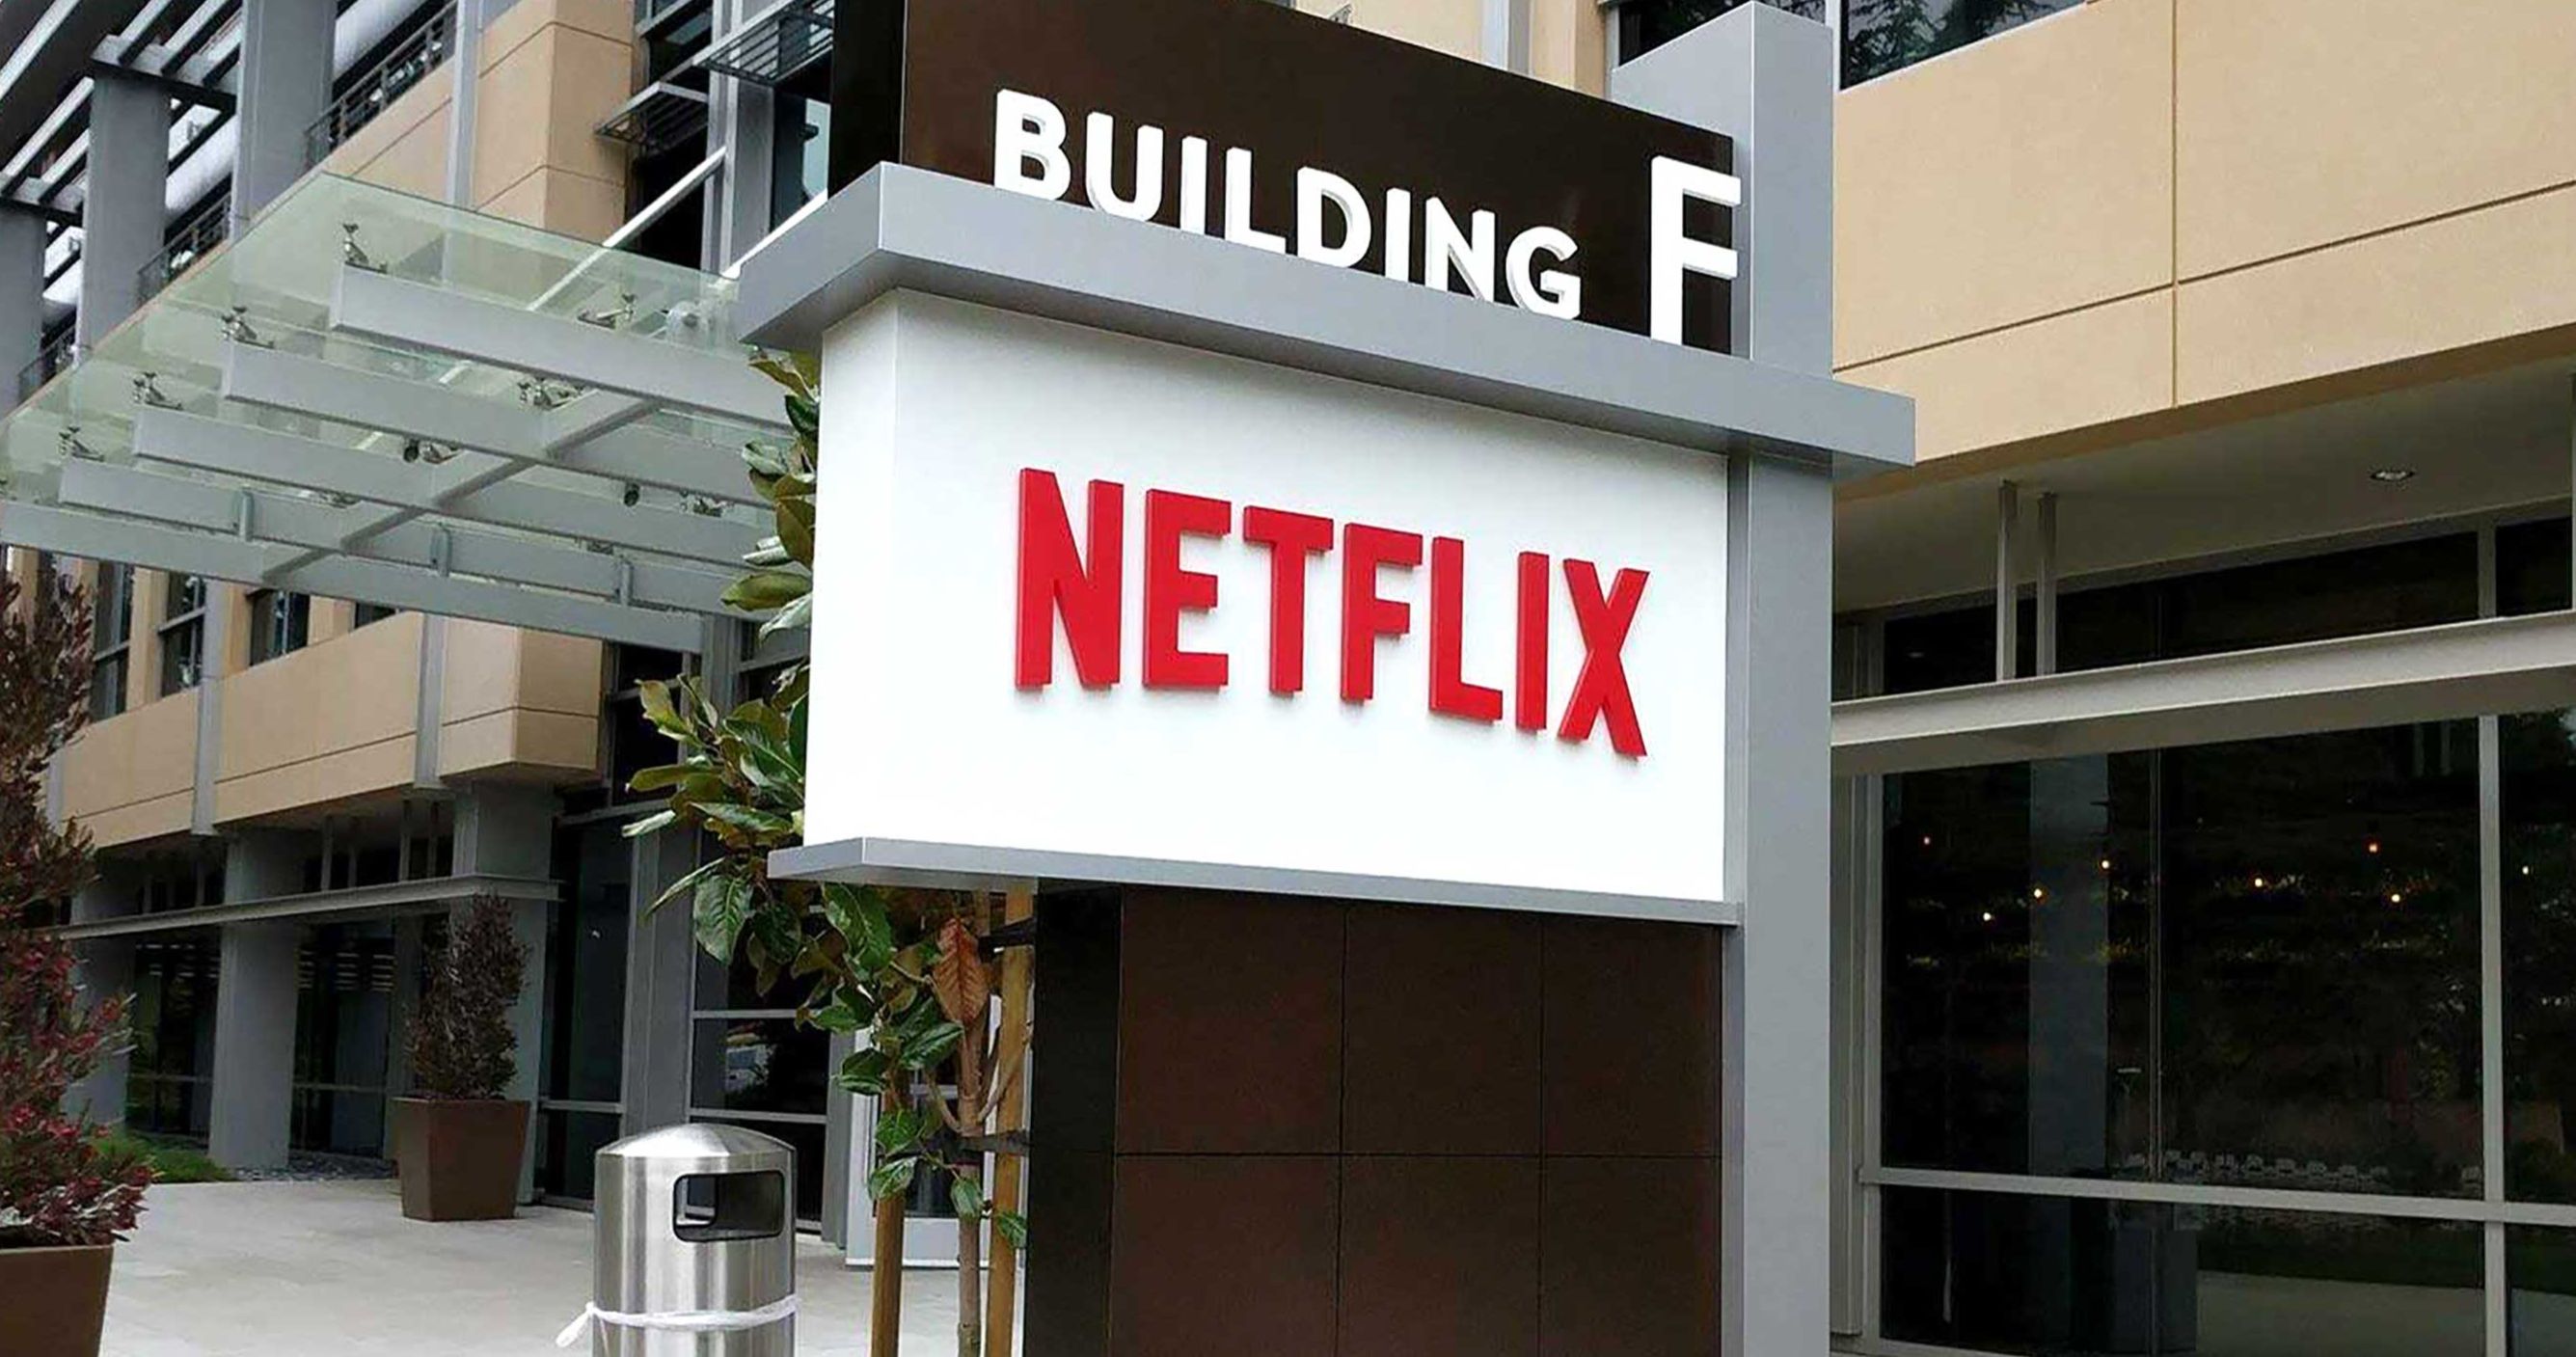 Netflix Announces $100M Relief Fund for the Creative Community